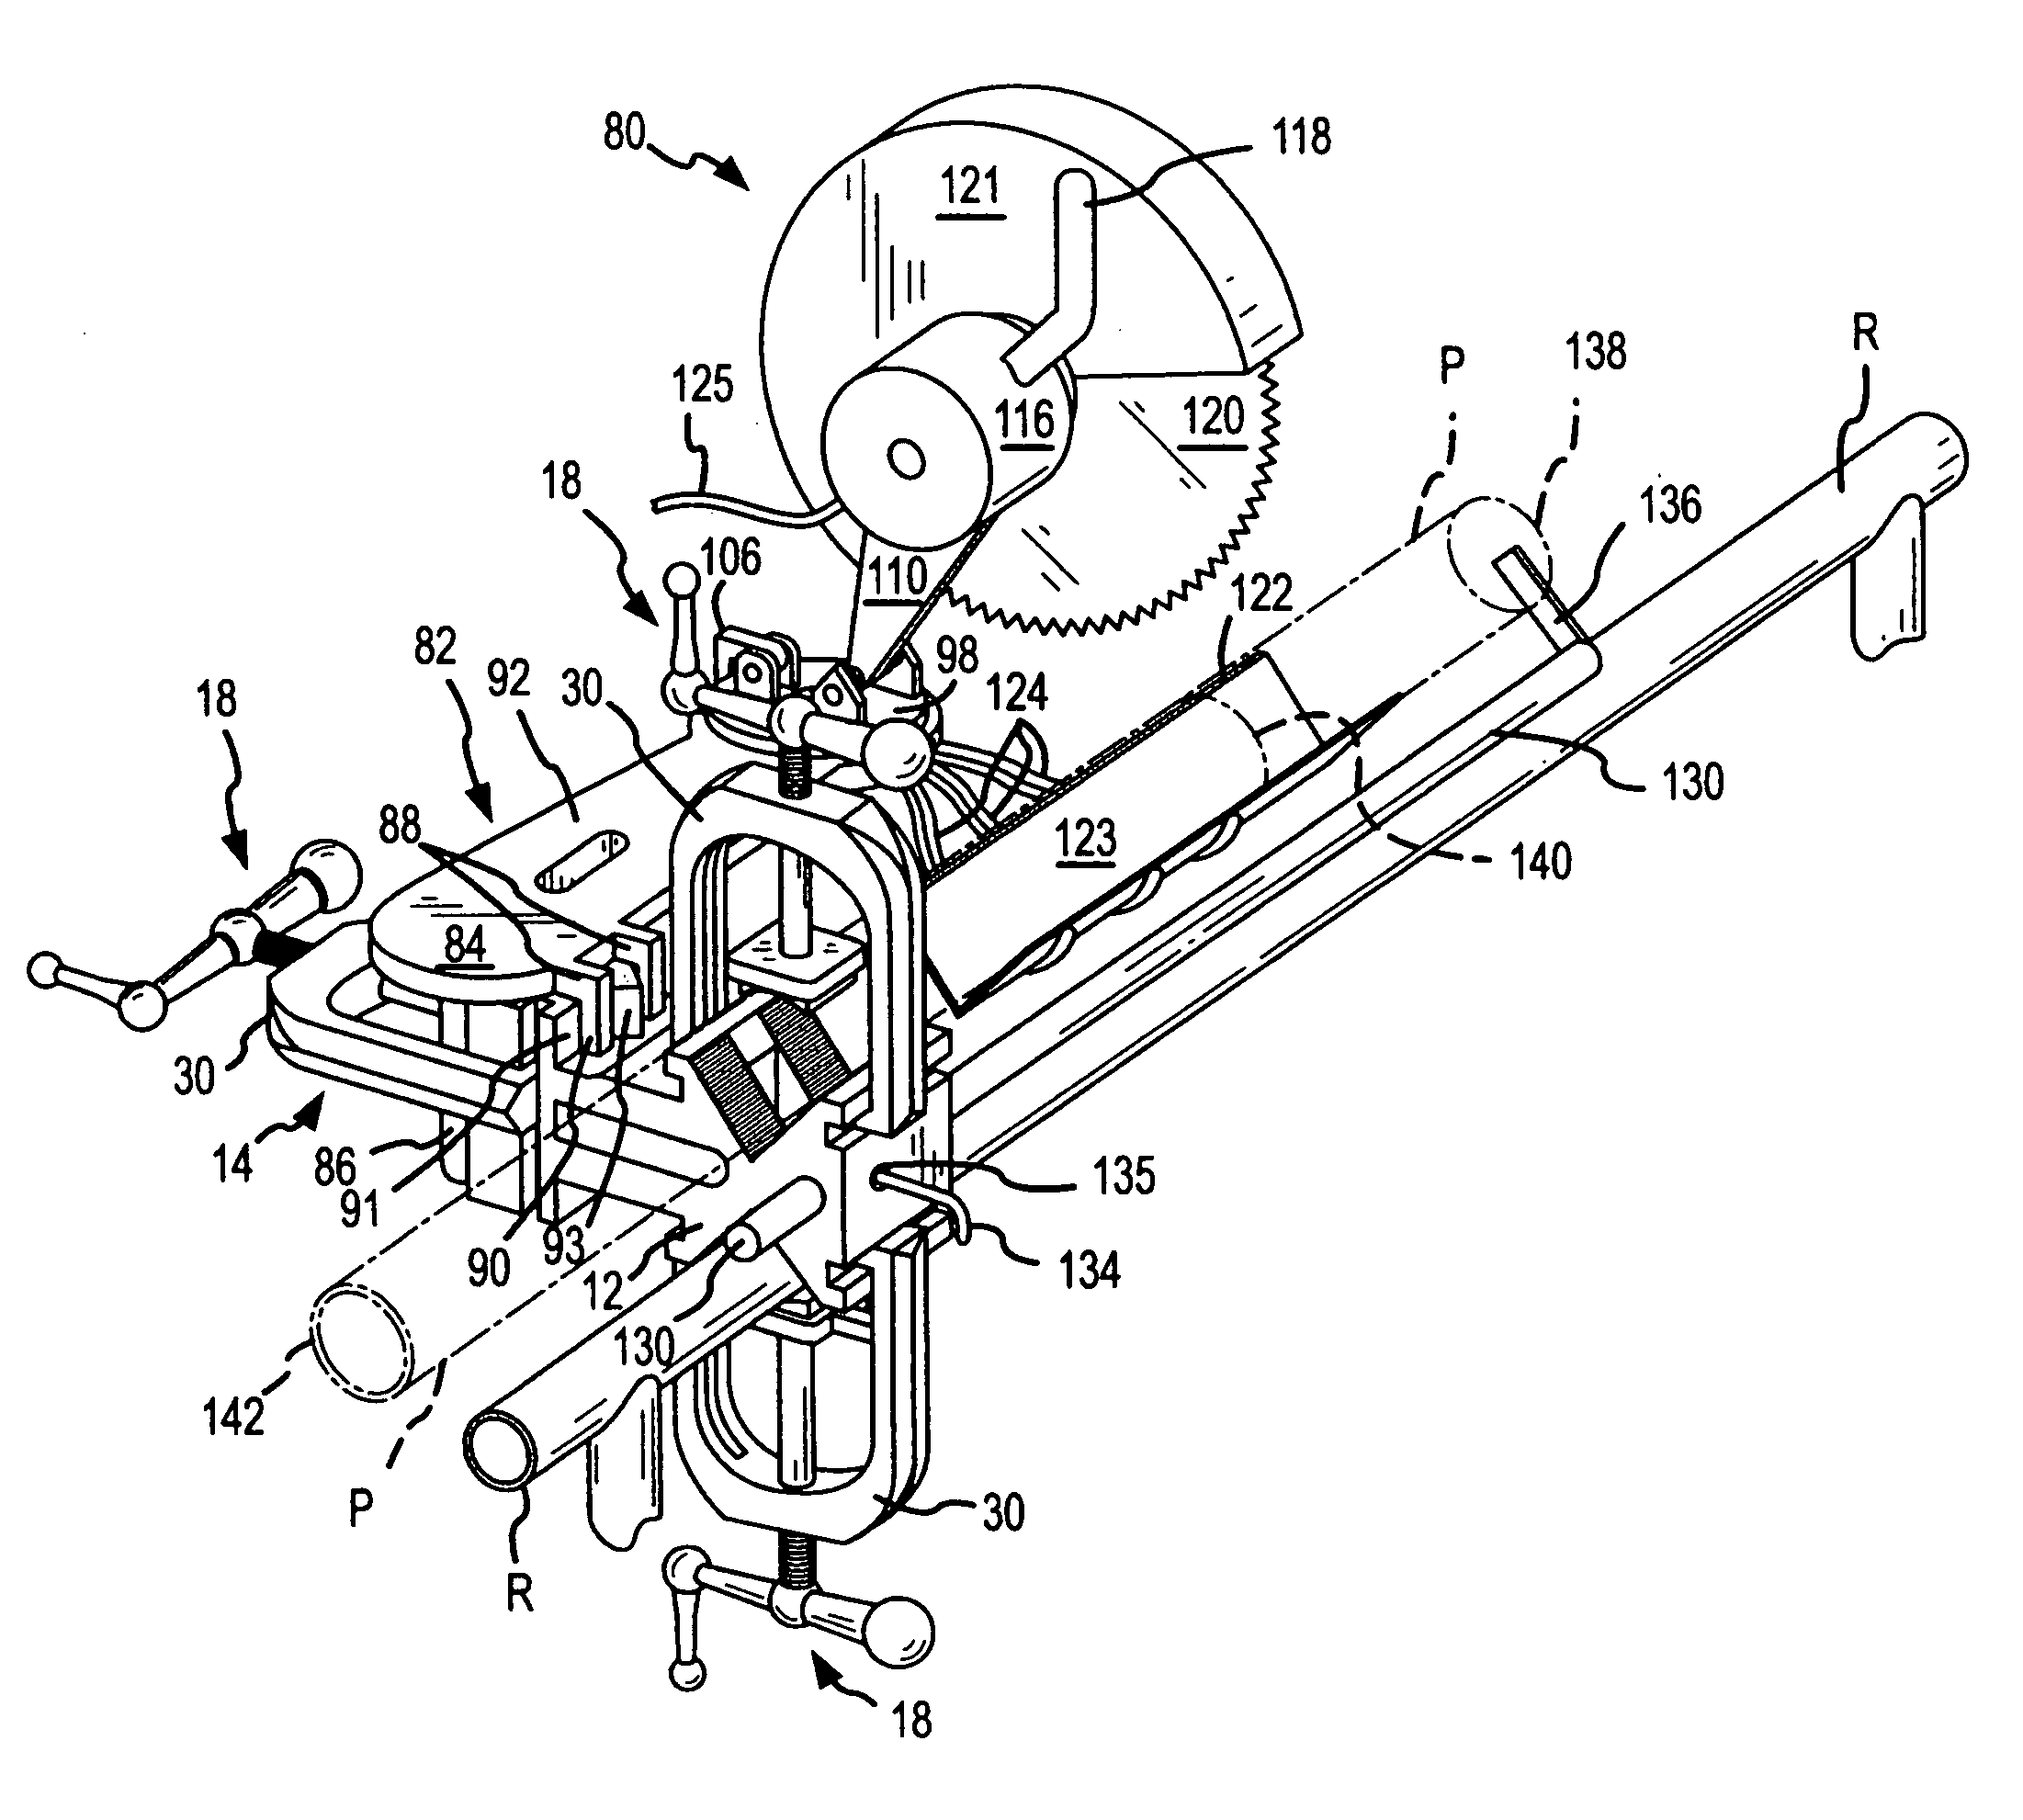 Portable vise and saw combination